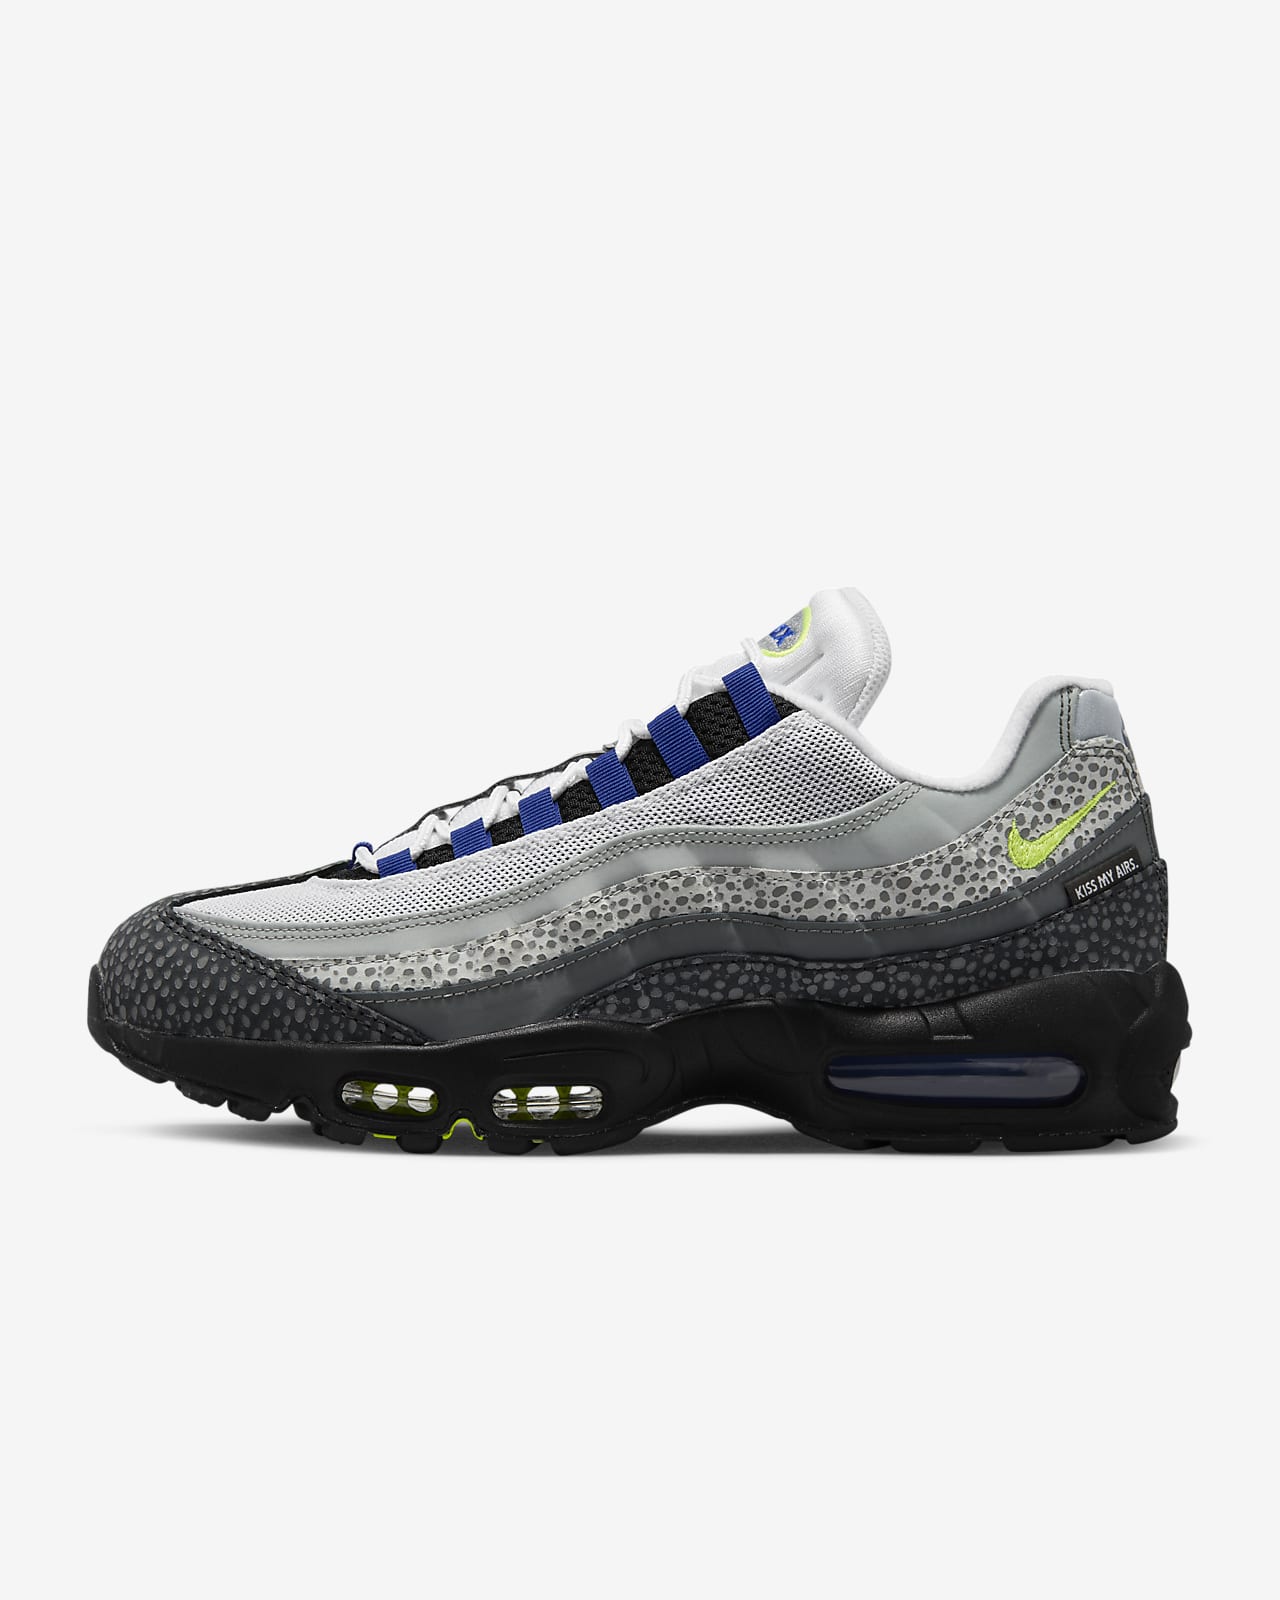 Autocomplacencia diamante hacer clic Nike Air Max 95 Herenschoenen. Nike NL